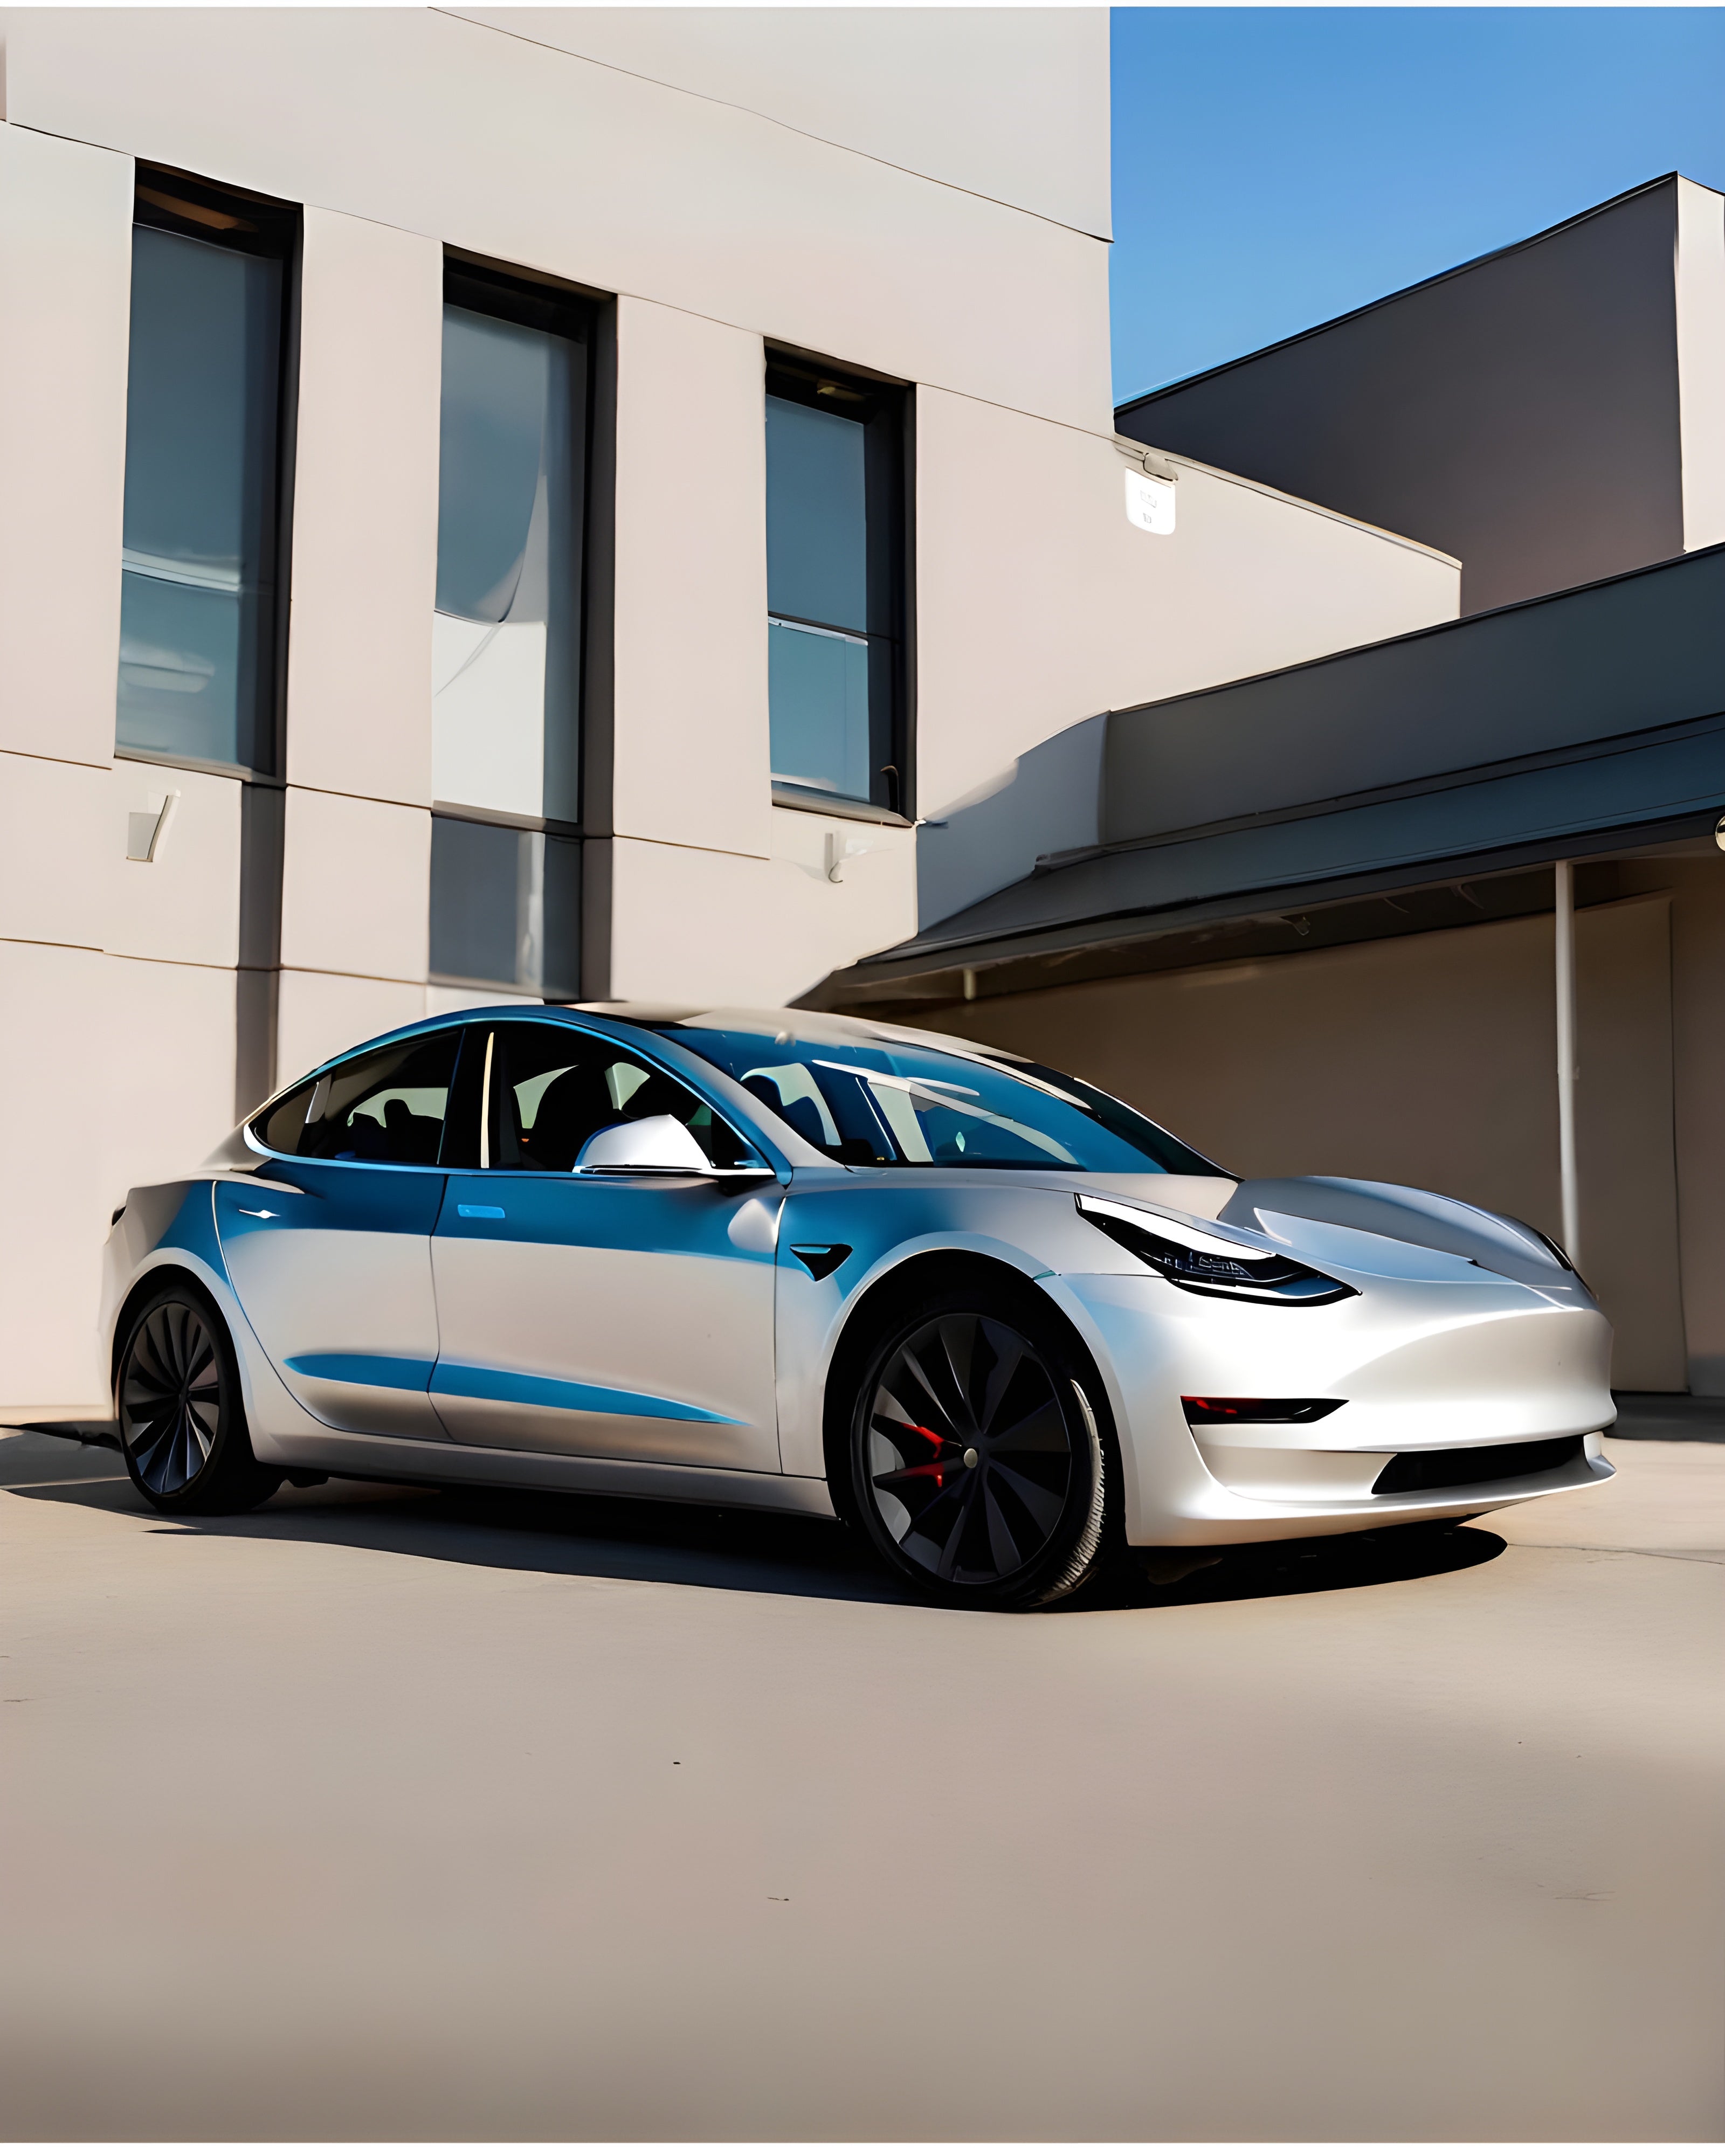  a tesla model 3 parked outside a contemporary building with large windows and beige walls, under a clear sky. The car has a streamlined design, with black and blue accents along the sides and wheels. The building has large, dark tinted windows and is painted in light beige color. 